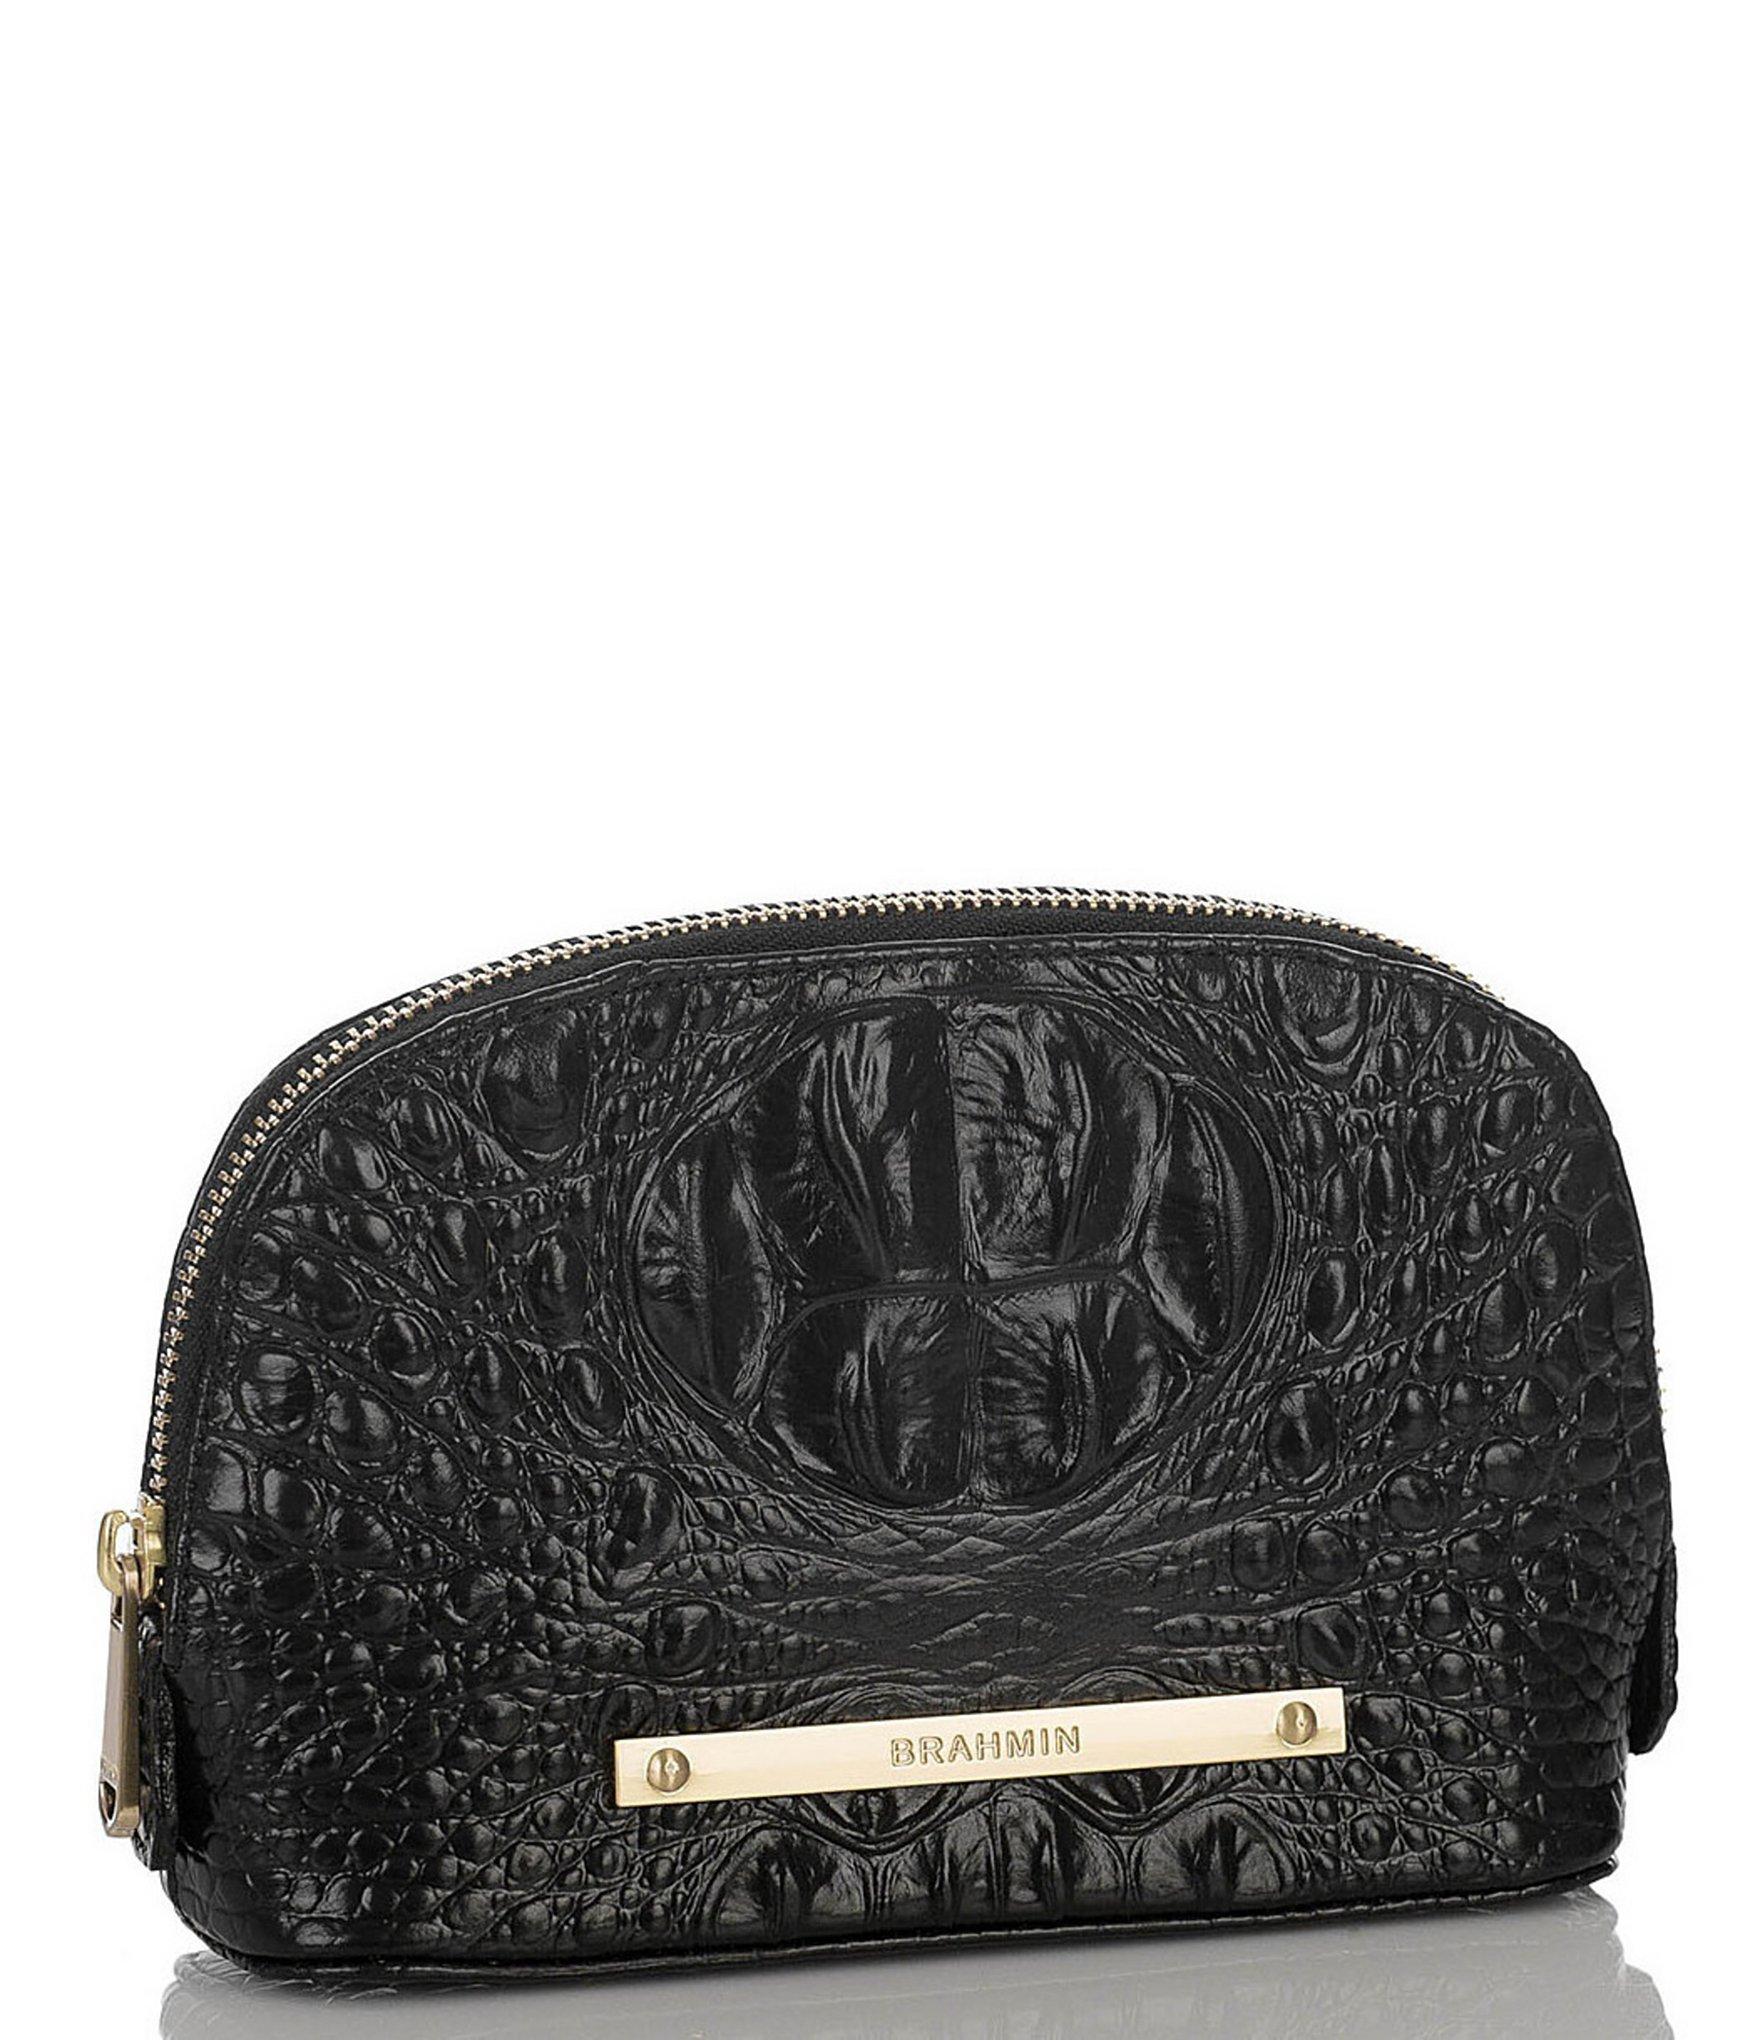 Brahmin Leather Melbourne Collection Tina Cosmetic Case in Black - Lyst